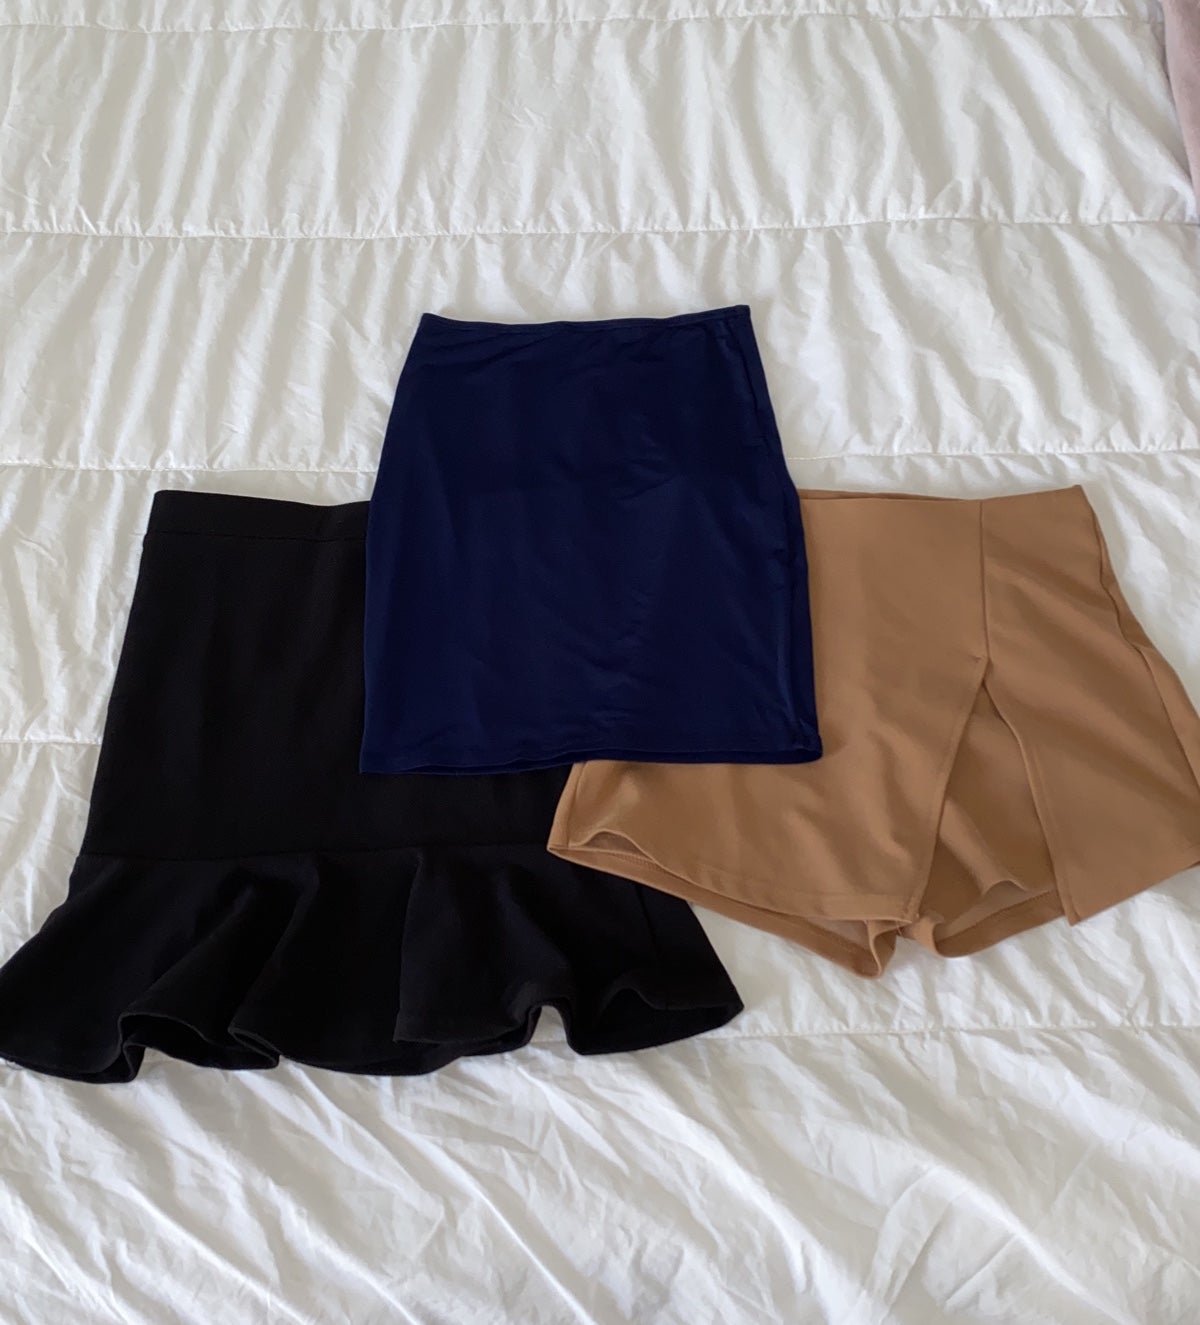 Discounted Skirt bundle glHCom4oF just for you